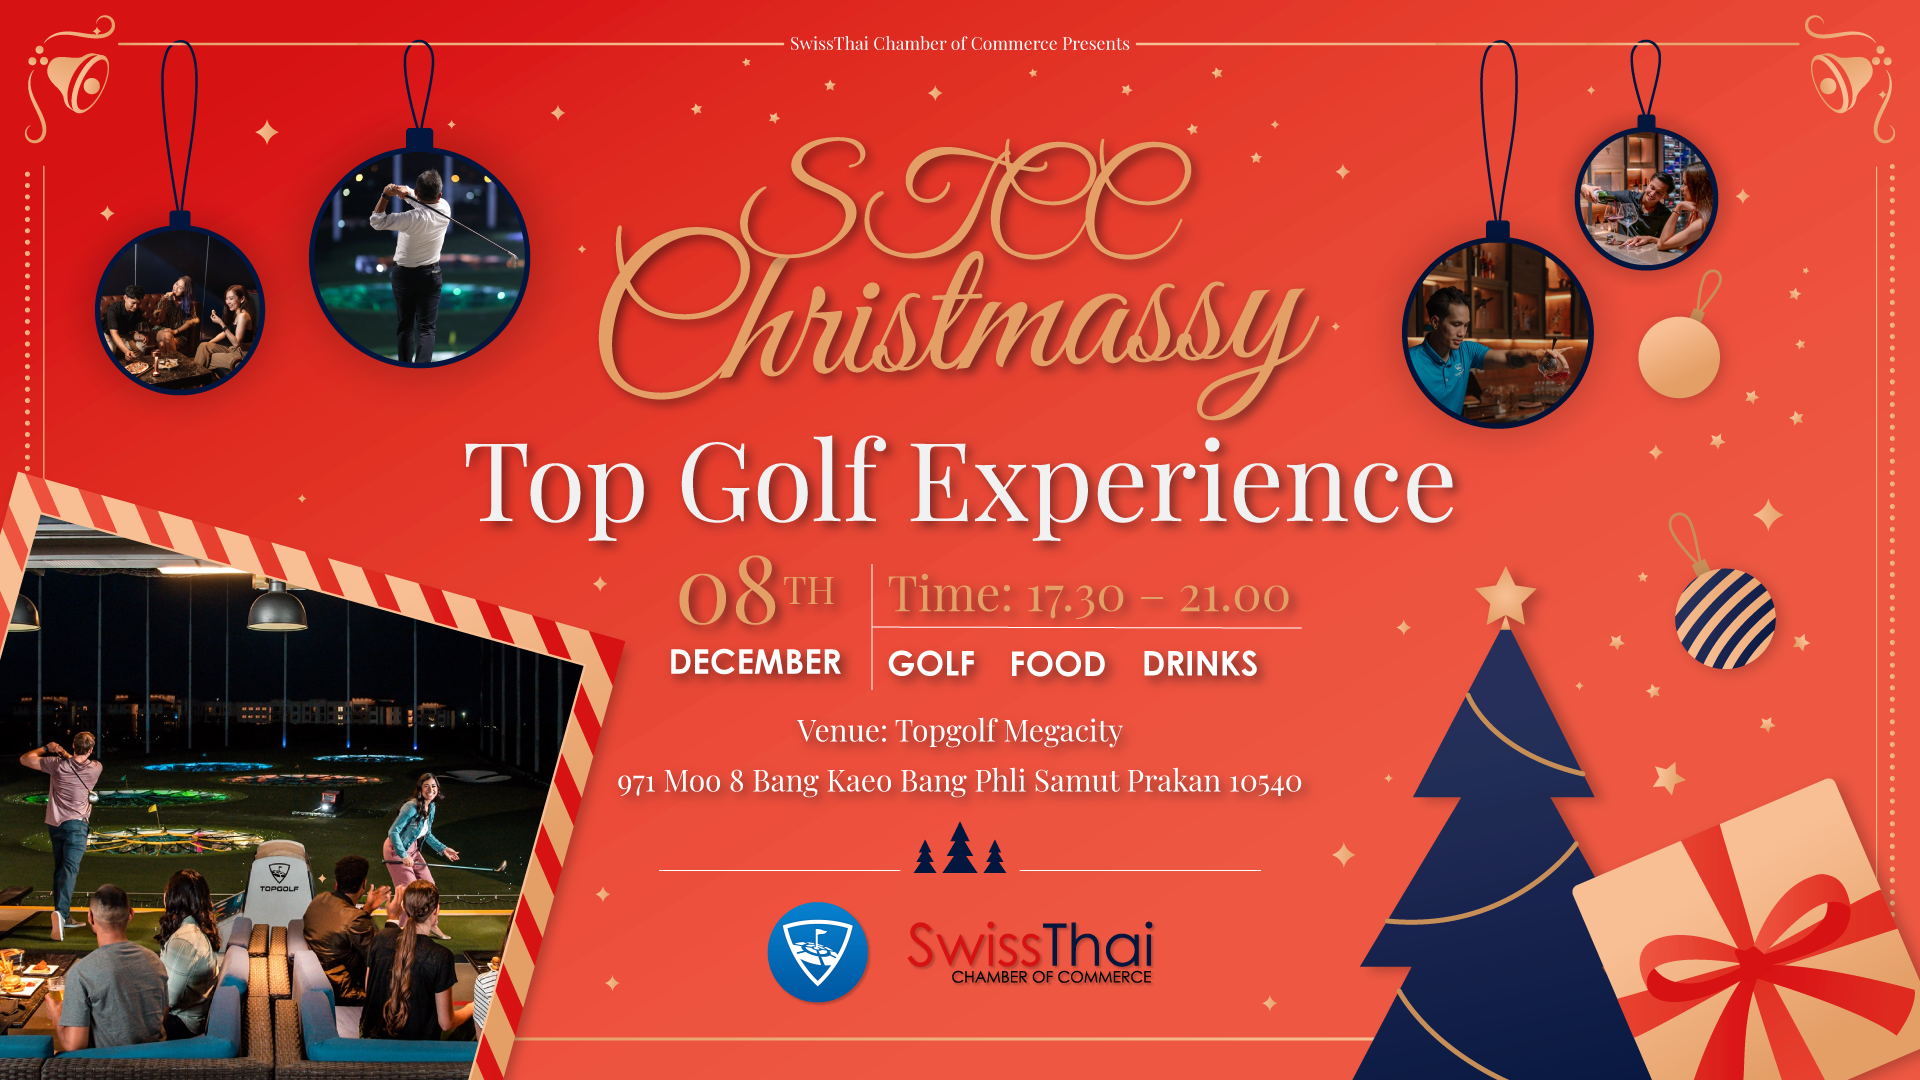 thumbnails STCC Christmassy Top Golf Experience